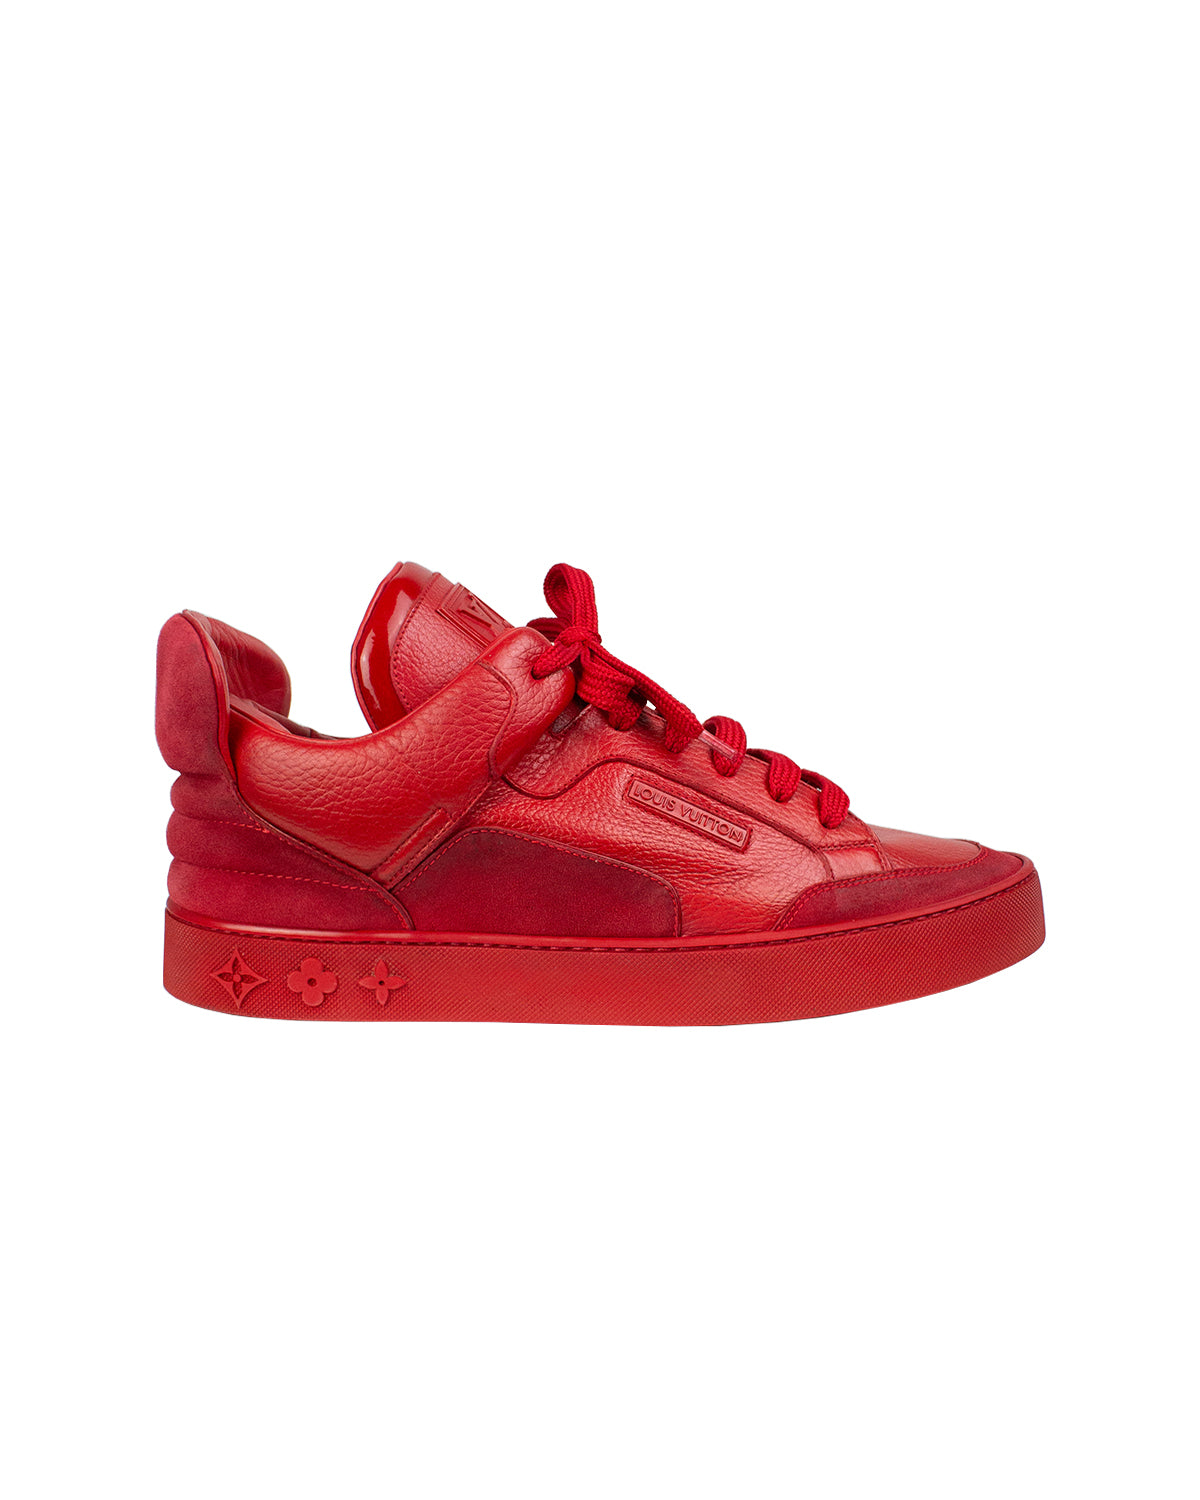 Louis Vuitton Kanye West Red Dons Size LV 7.5 